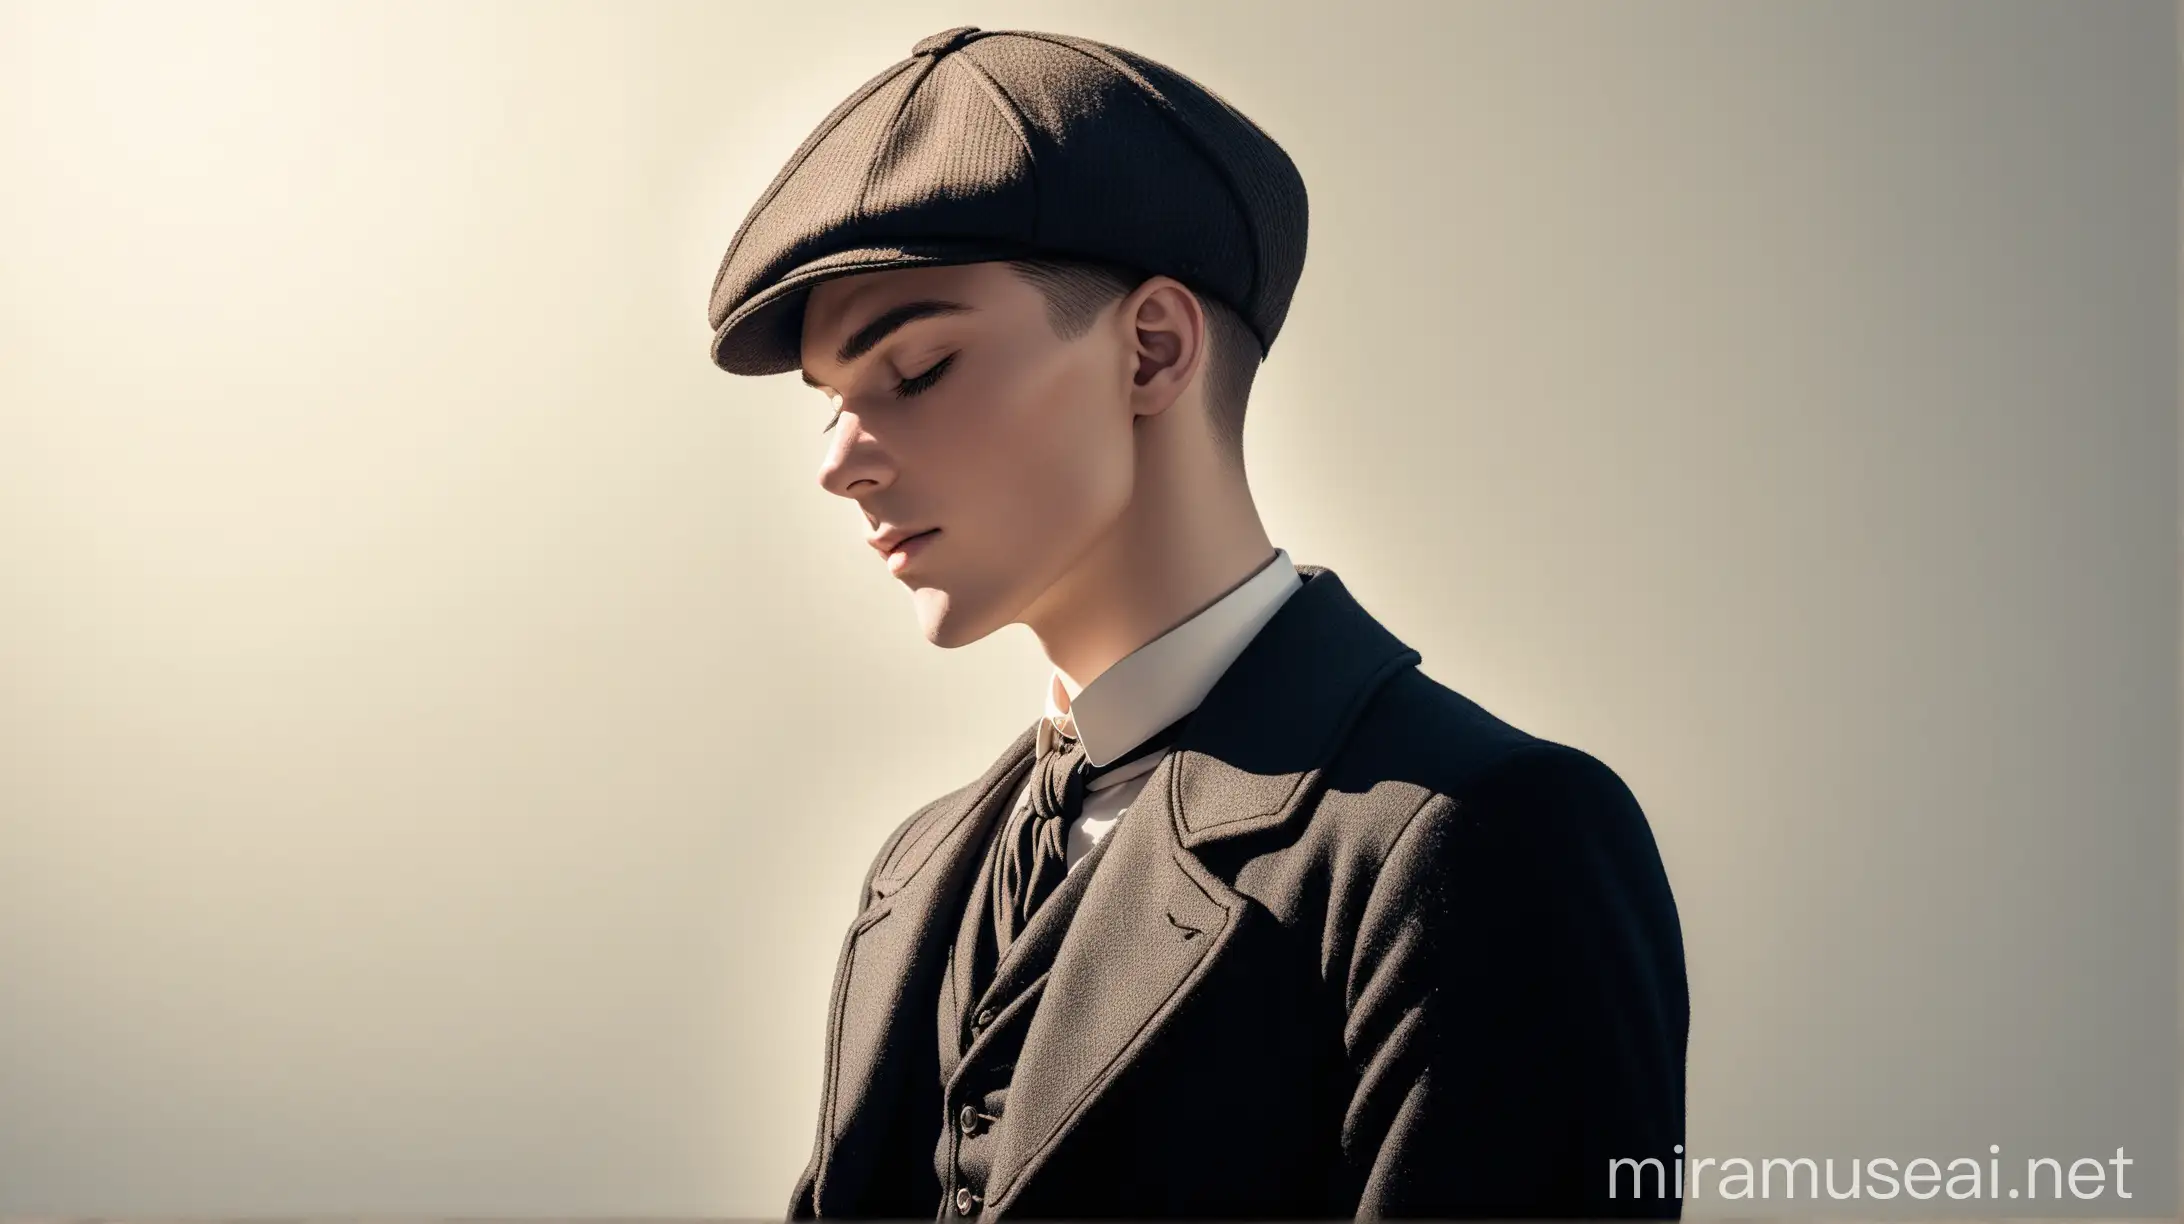 Stylish Young Man in Peaky Blinders Attire Standing with Eyes Closed on White Background